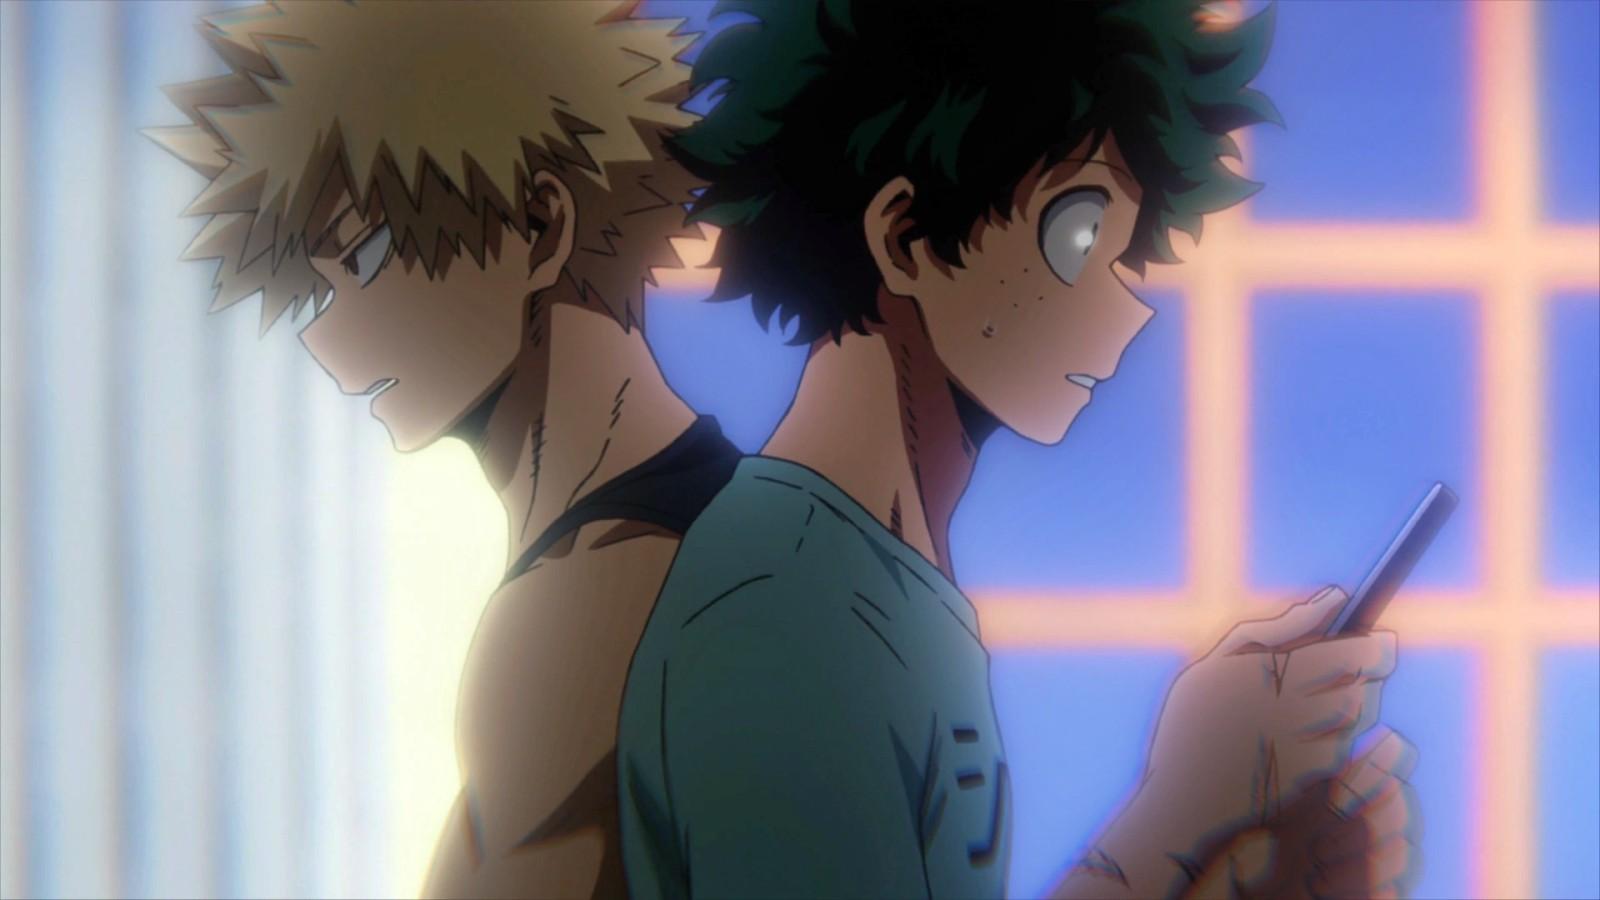 Deku and Bakugo passing by each other